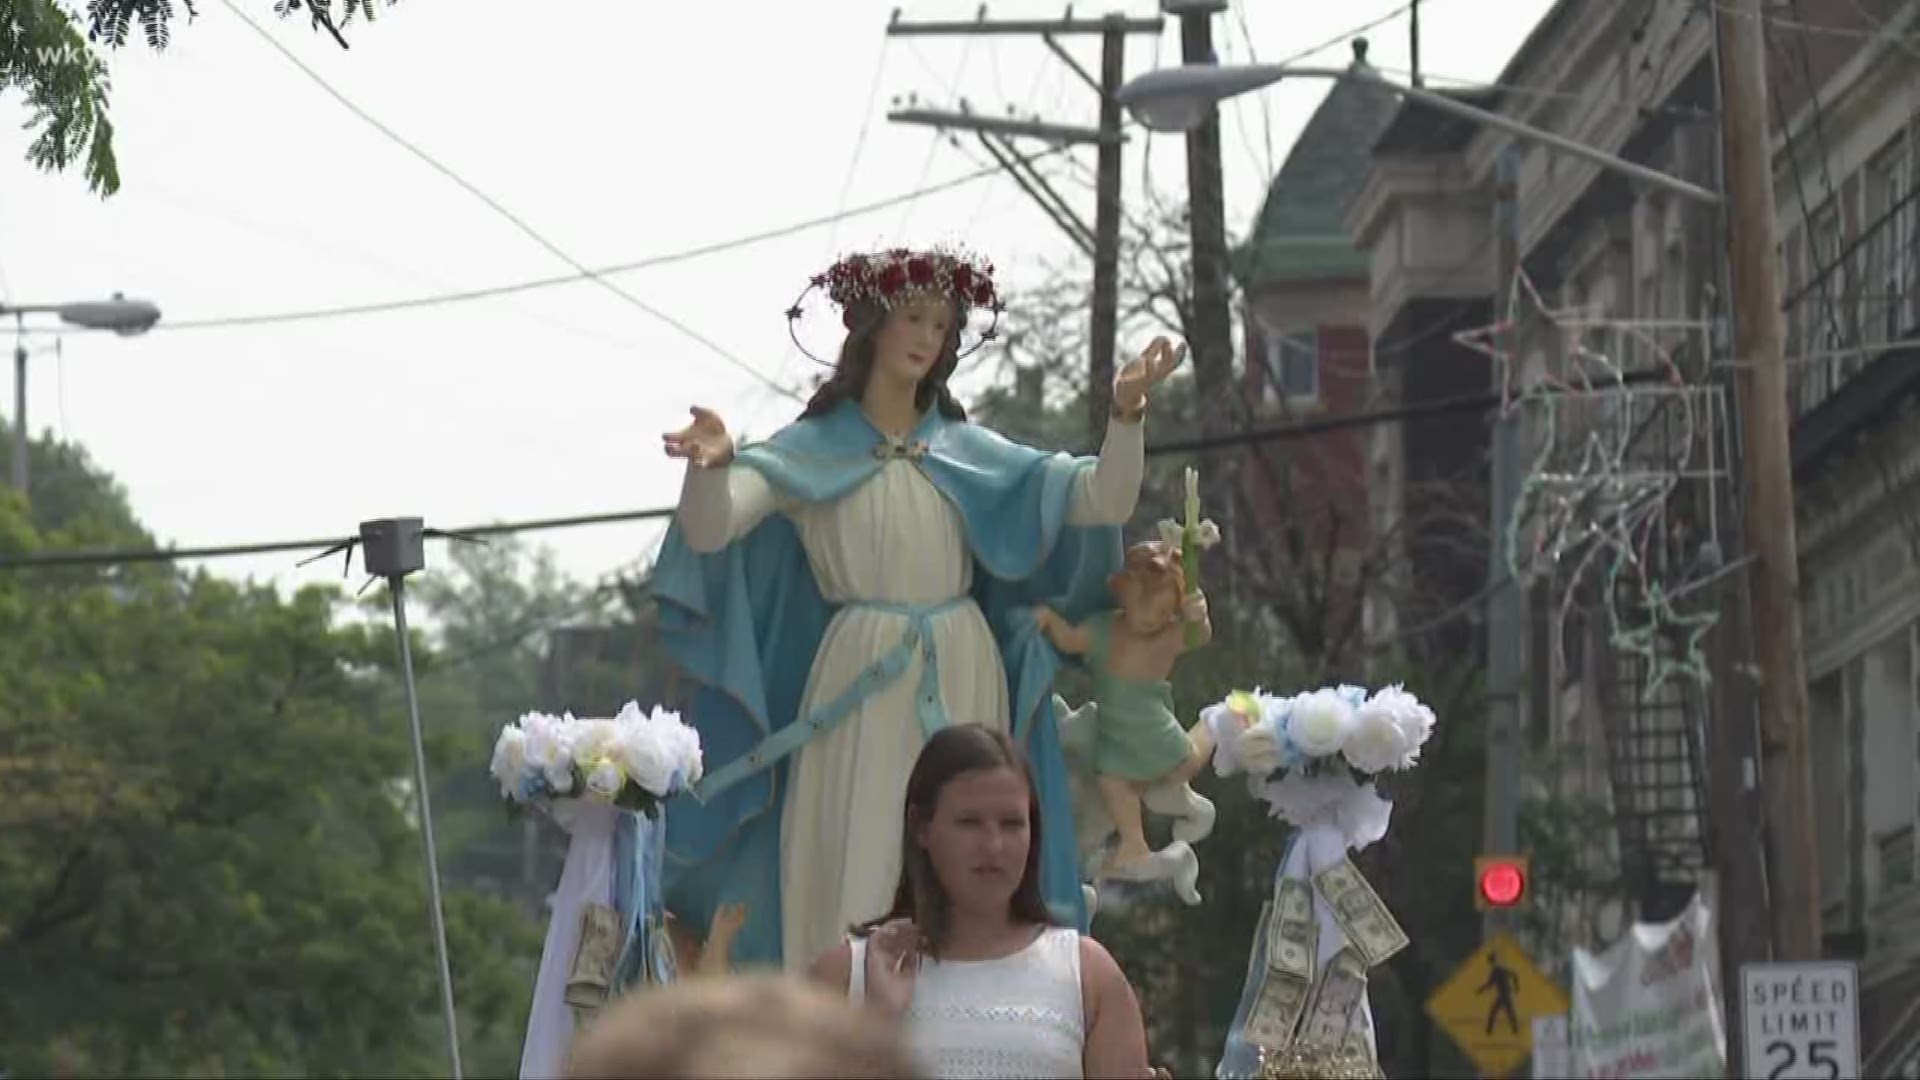 120th Feast of the Assumption begins in Cleveland’s Little Italy